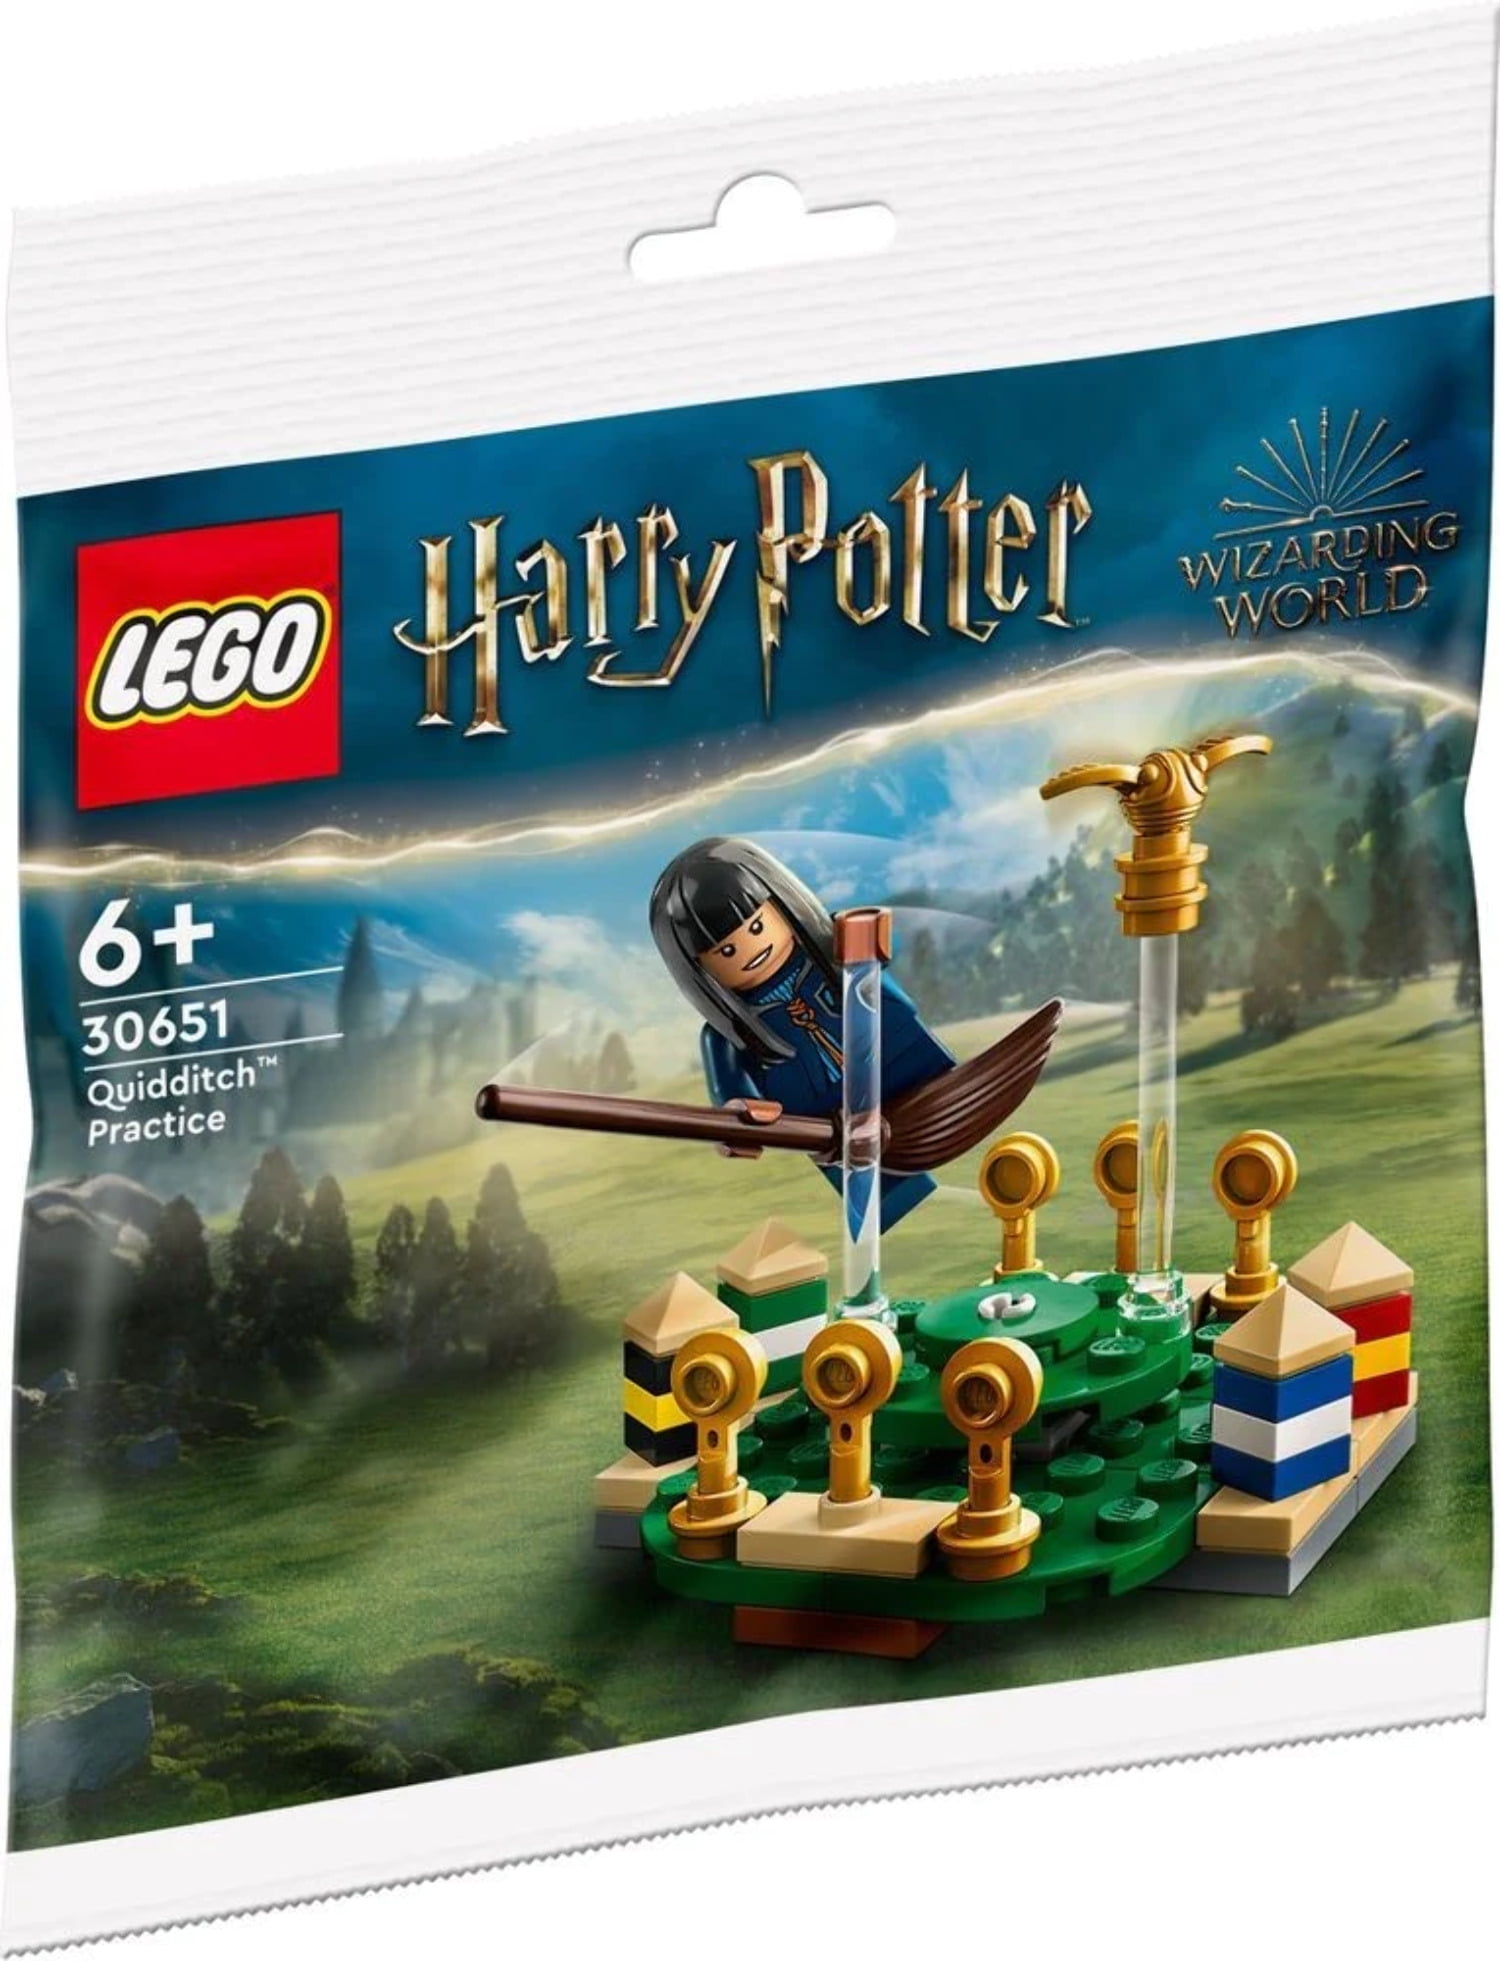 LEGO Harry Potter Hogwarts: Dumbledore’s Office 76402 Castle Toy, Set with  Sorting Hat, Sword of Gryffindor and 6 Minifigures, for Kids Aged 8 Plus